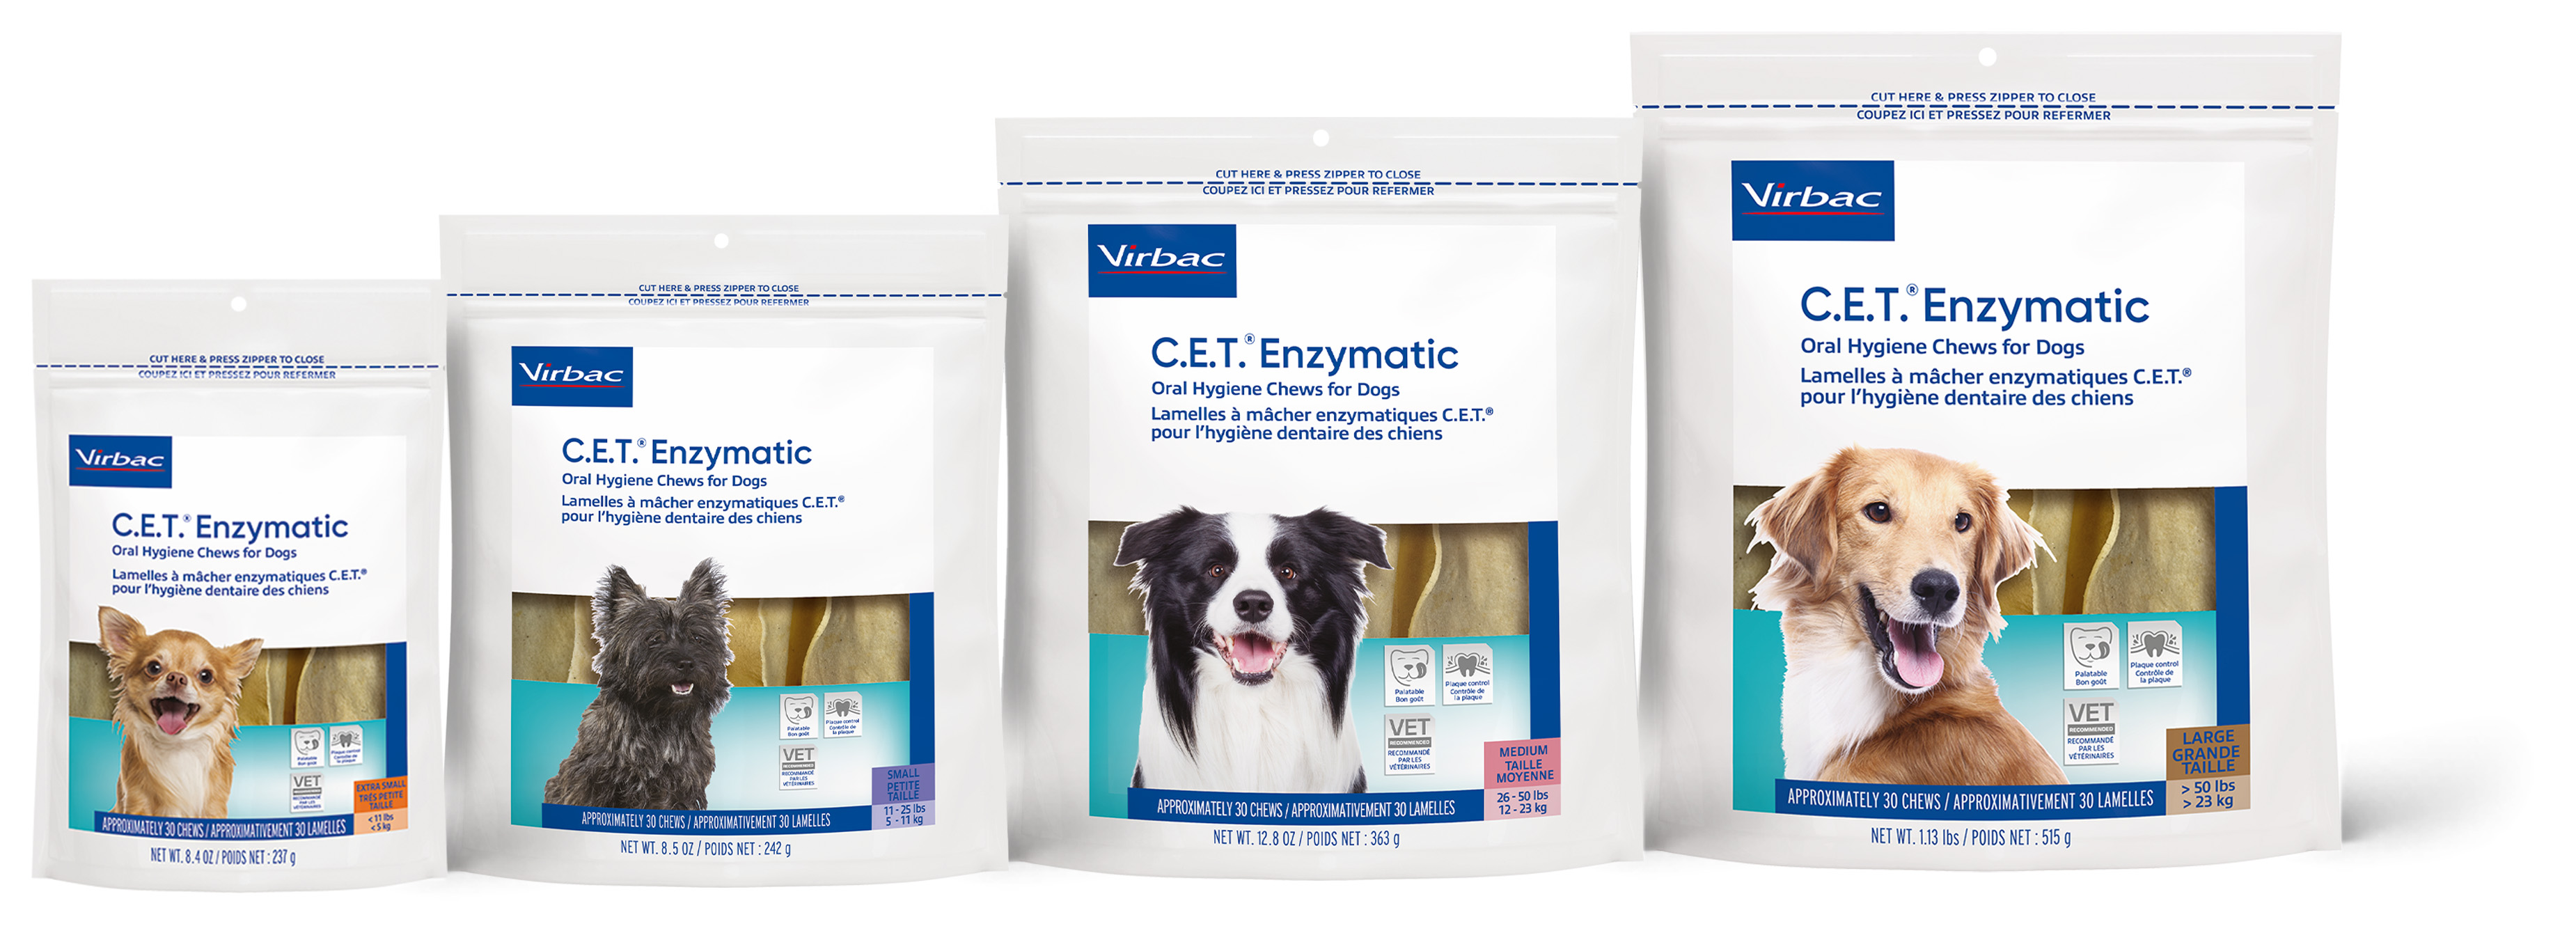 are cet dental chews safe for dogs